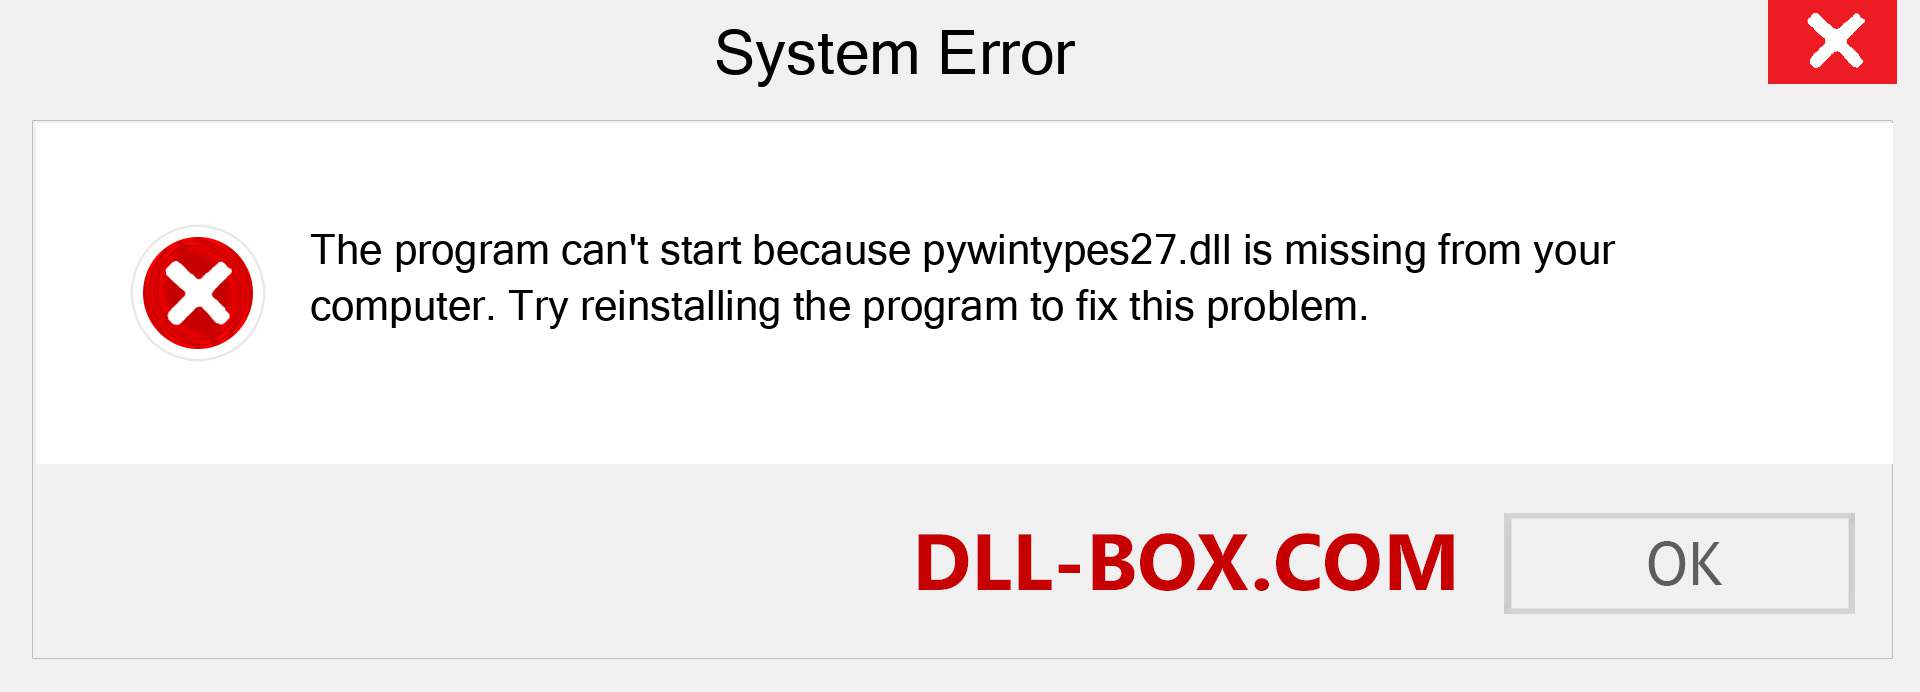  pywintypes27.dll file is missing?. Download for Windows 7, 8, 10 - Fix  pywintypes27 dll Missing Error on Windows, photos, images